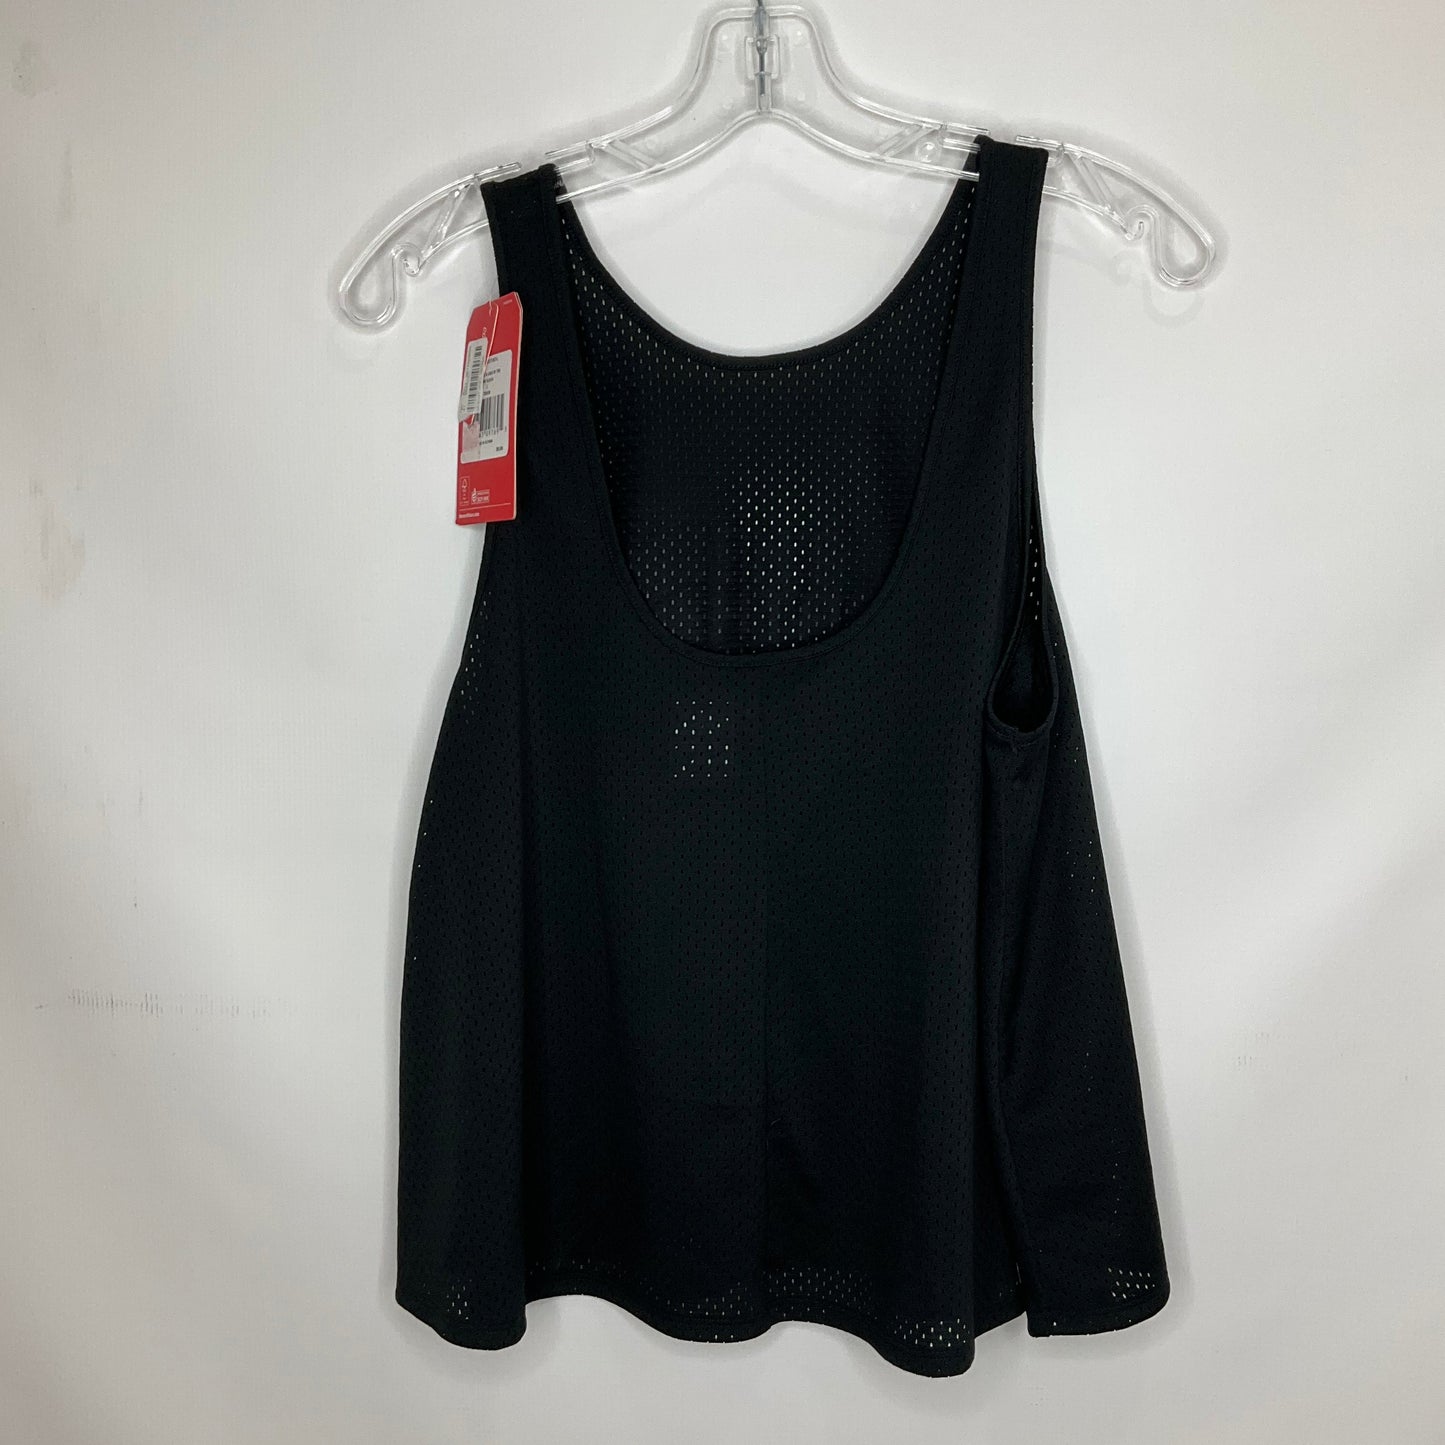 Black Athletic Tank Top The North Face, Size L